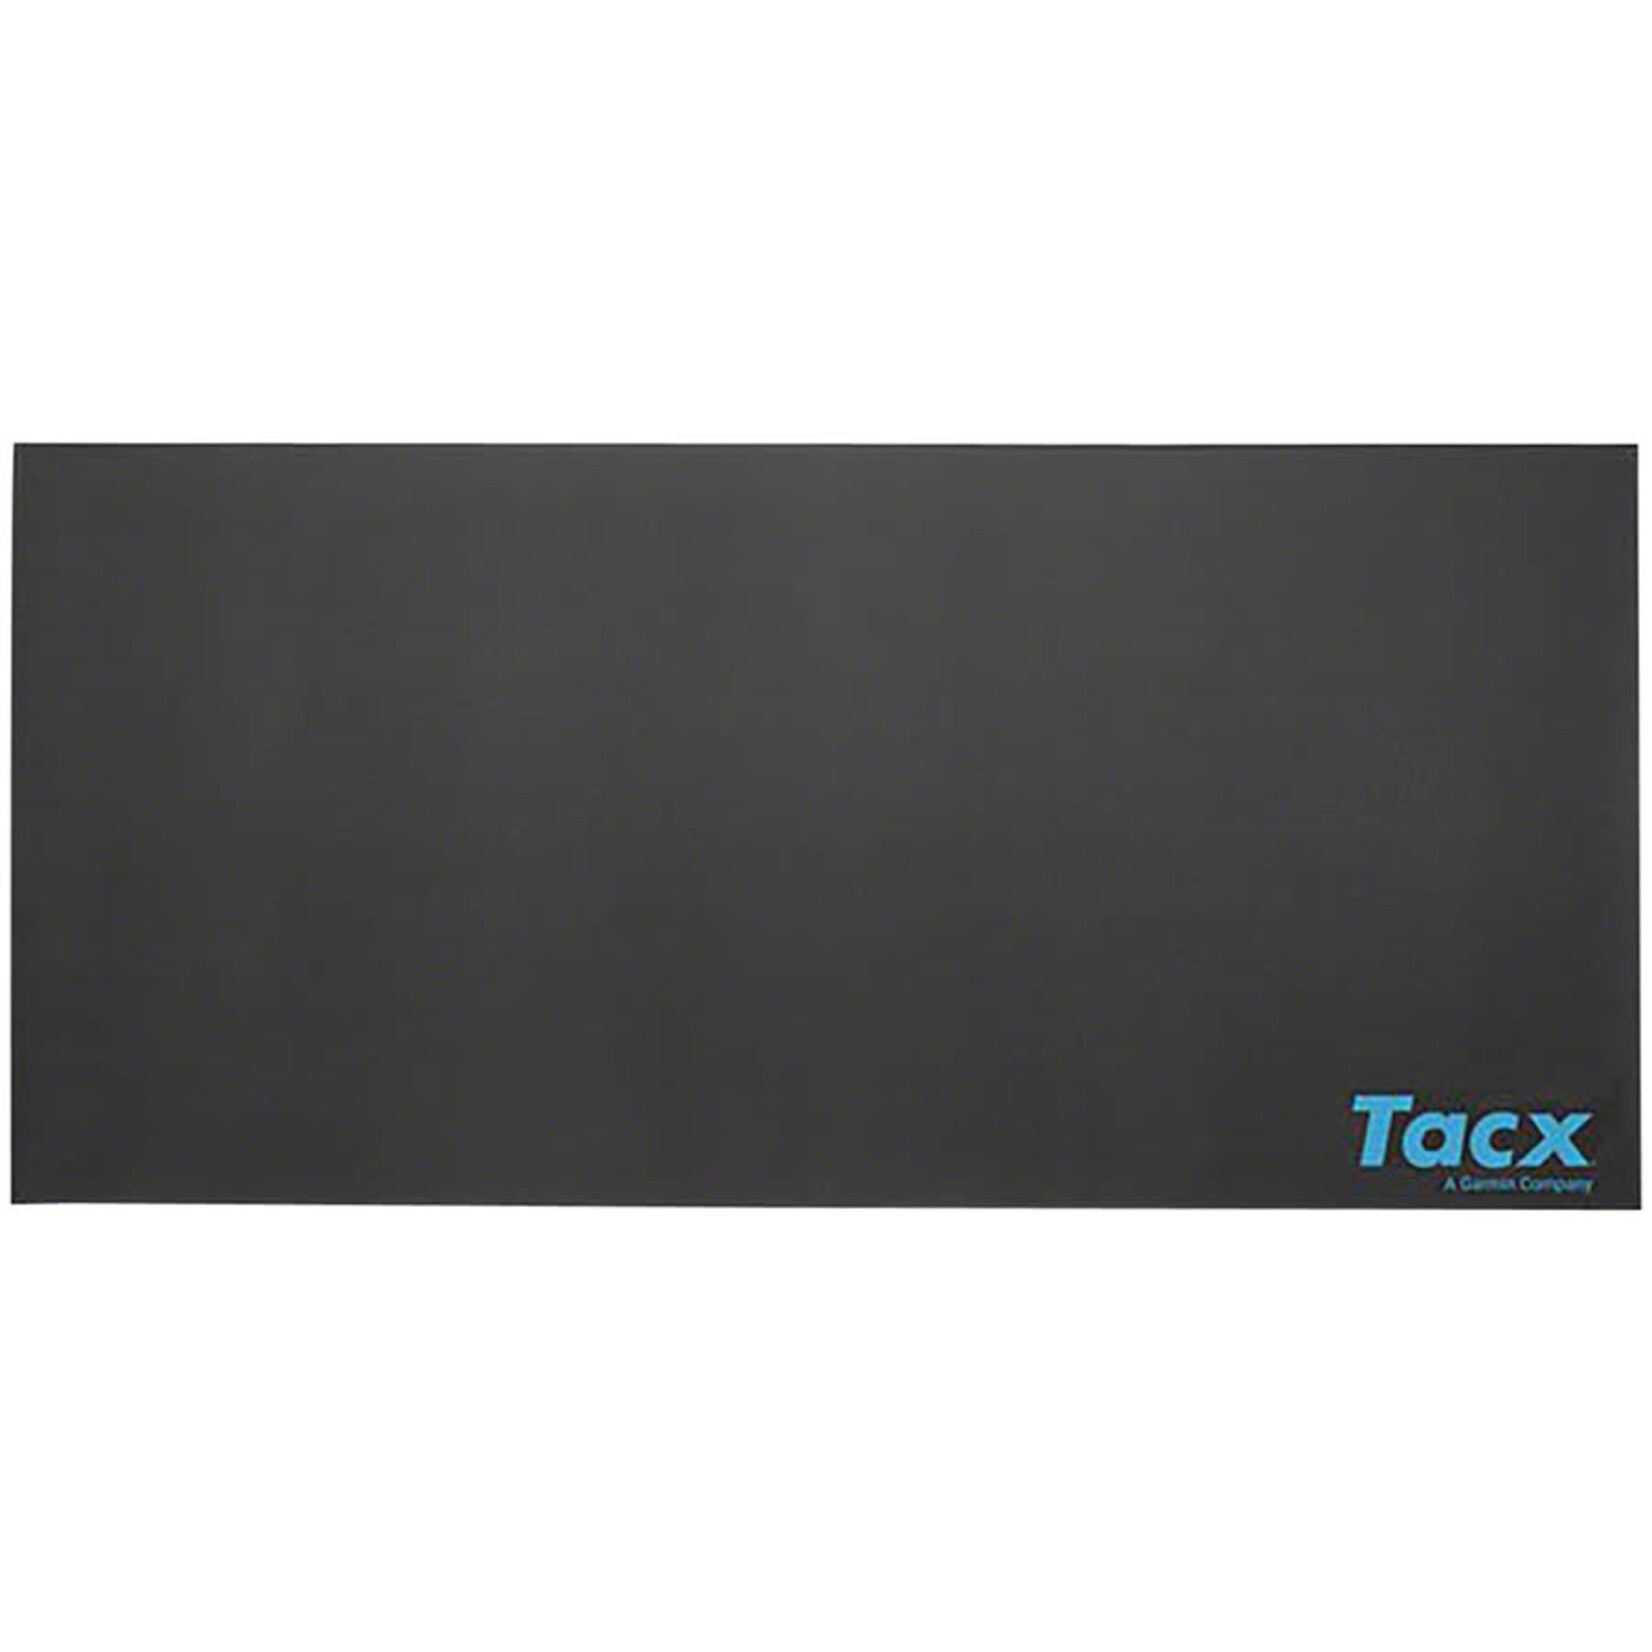 Tacx Trainer Mat - Rollable